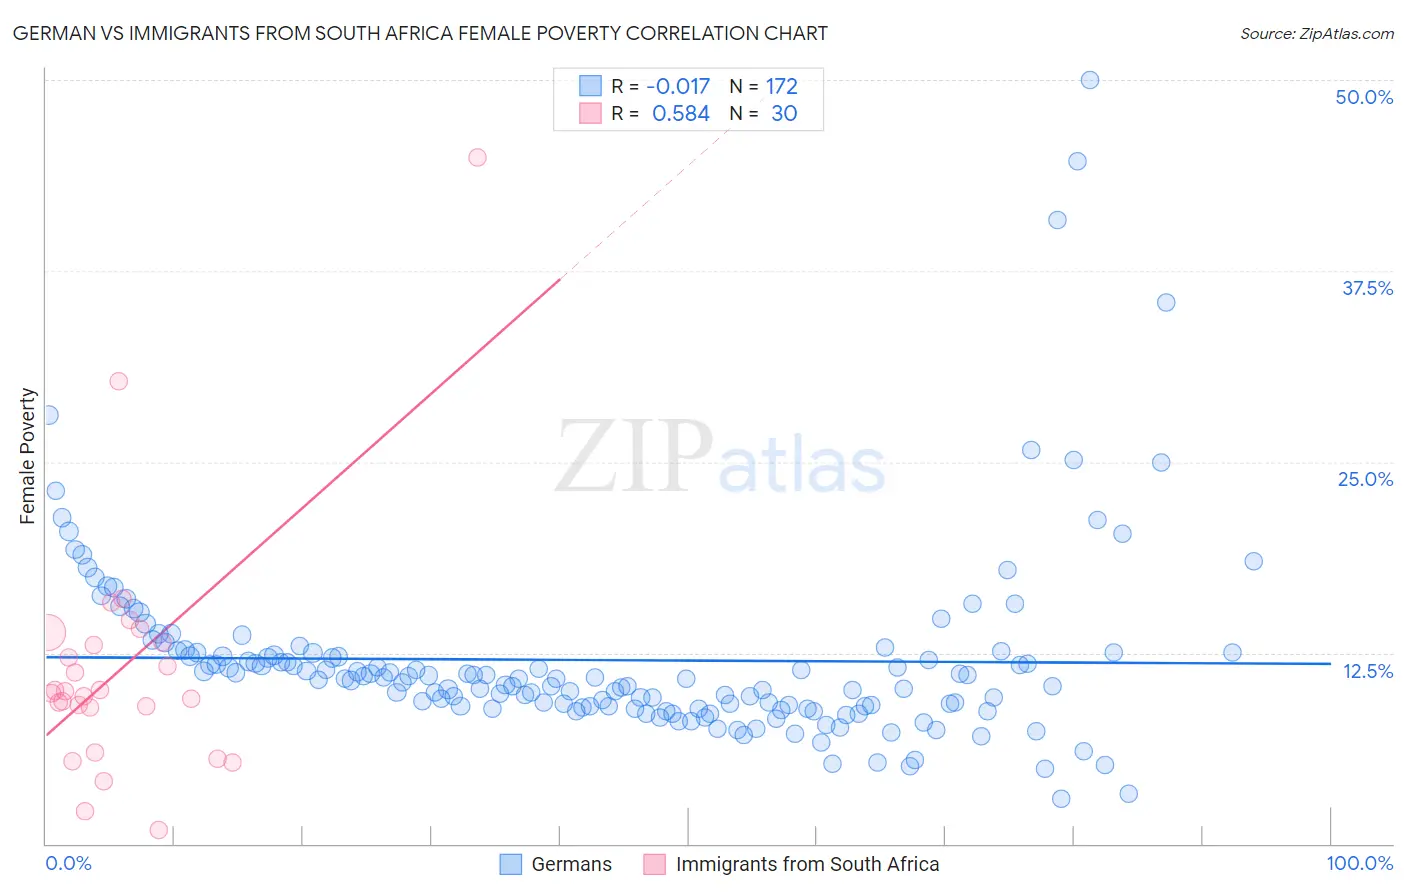 German vs Immigrants from South Africa Female Poverty